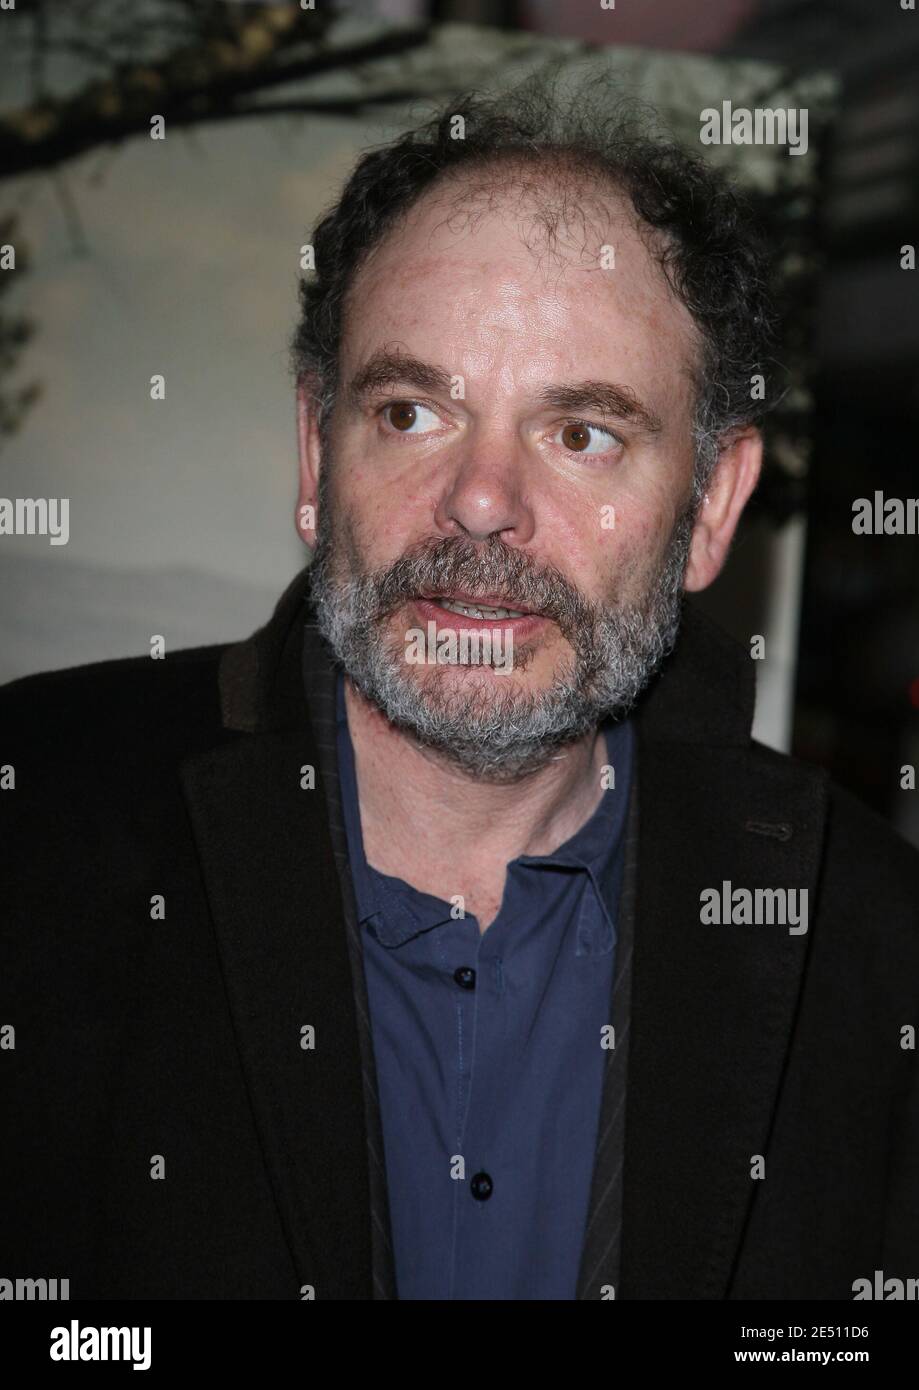 Jean-Pierre Darroussin attends the premiere of 2 Jours A Tuer' held at Marignan theater in Paris, France on April 21, 2008. Photo by Denis Guignebourg/ABACAPRESS.COM Stock Photo